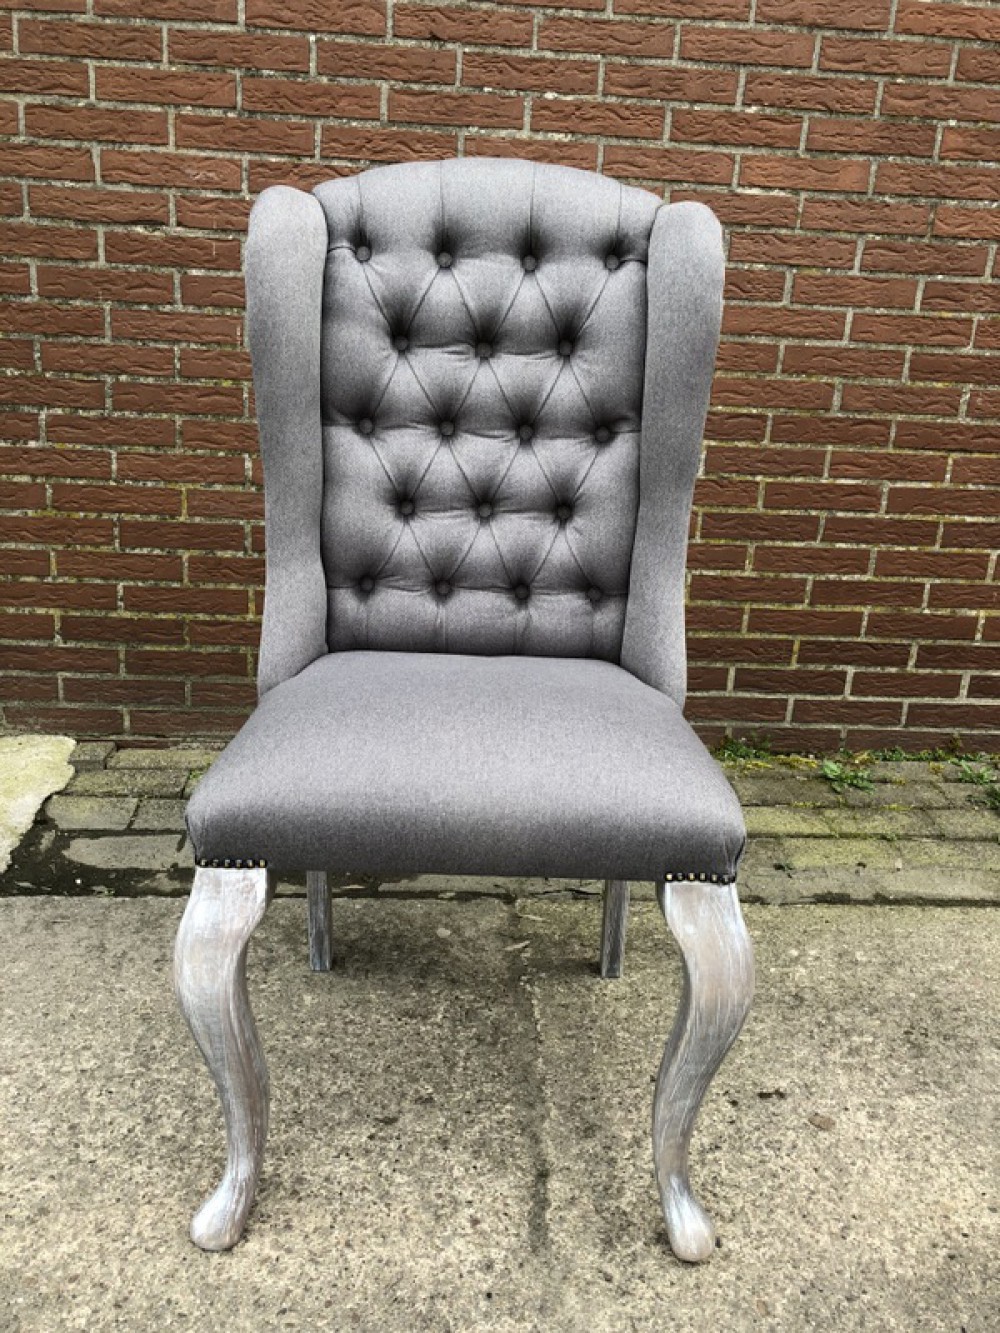 24+ schlau Bild Stuhl Chesterfield : Sessel chesterfield, Gepolsterter Stuhl - Sessel Farbe leinen - International postage of items may be subject to customs processing and additional charges.